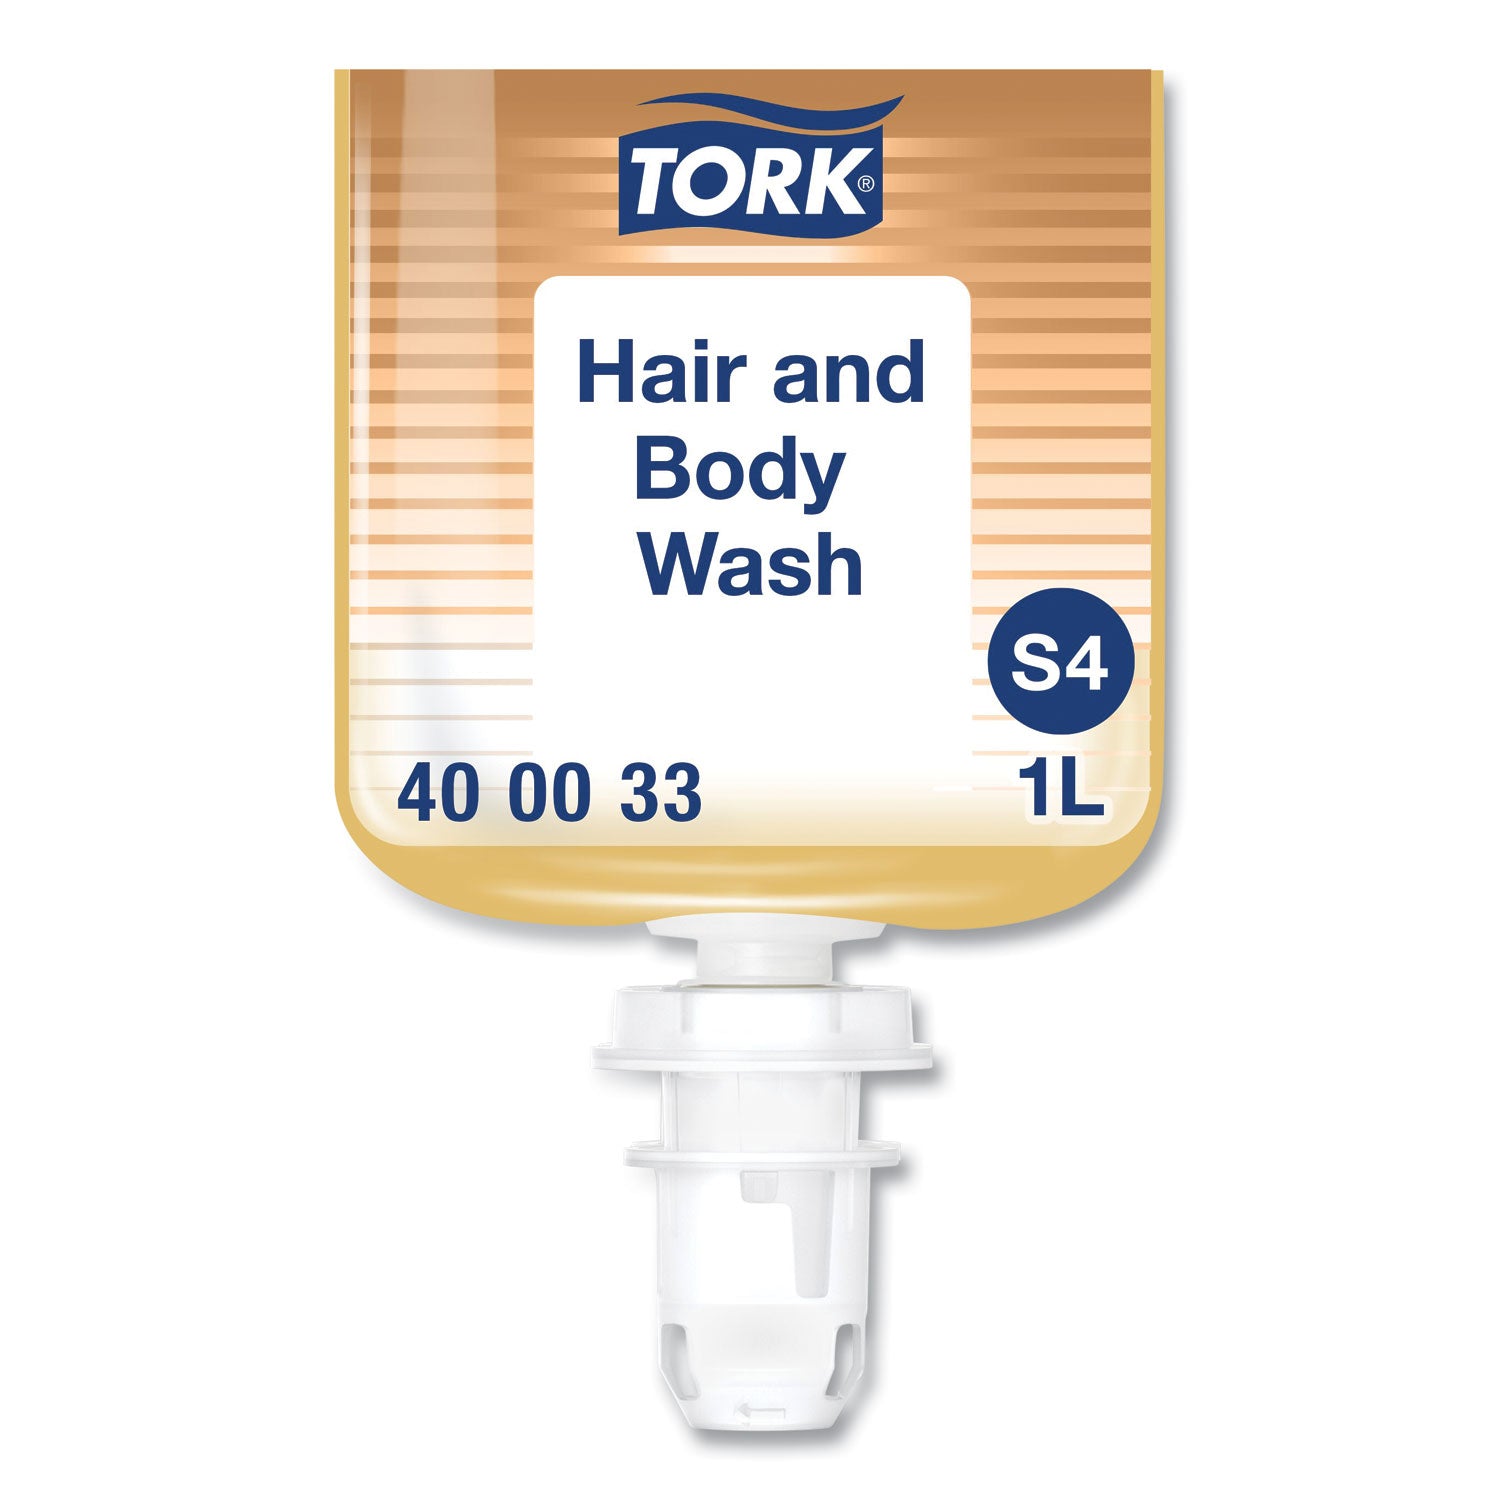 hair-and-body-wash-clean-scent-1-l-6-carton_trk400033 - 1